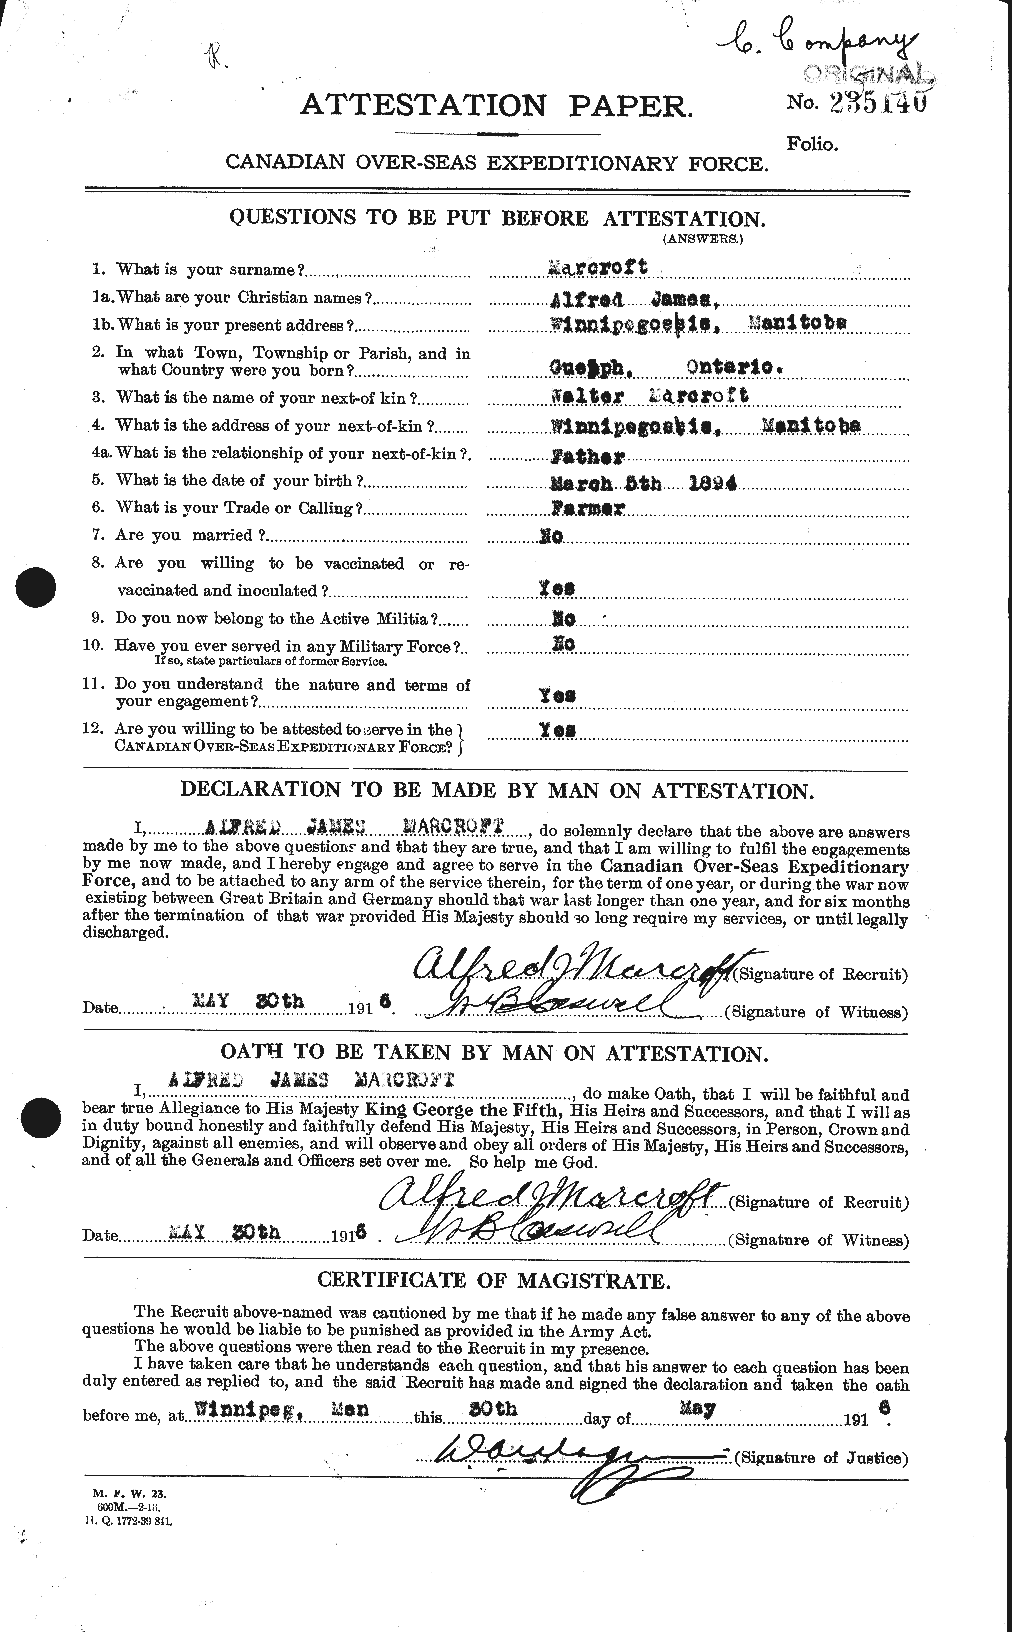 Personnel Records of the First World War - CEF 480199a